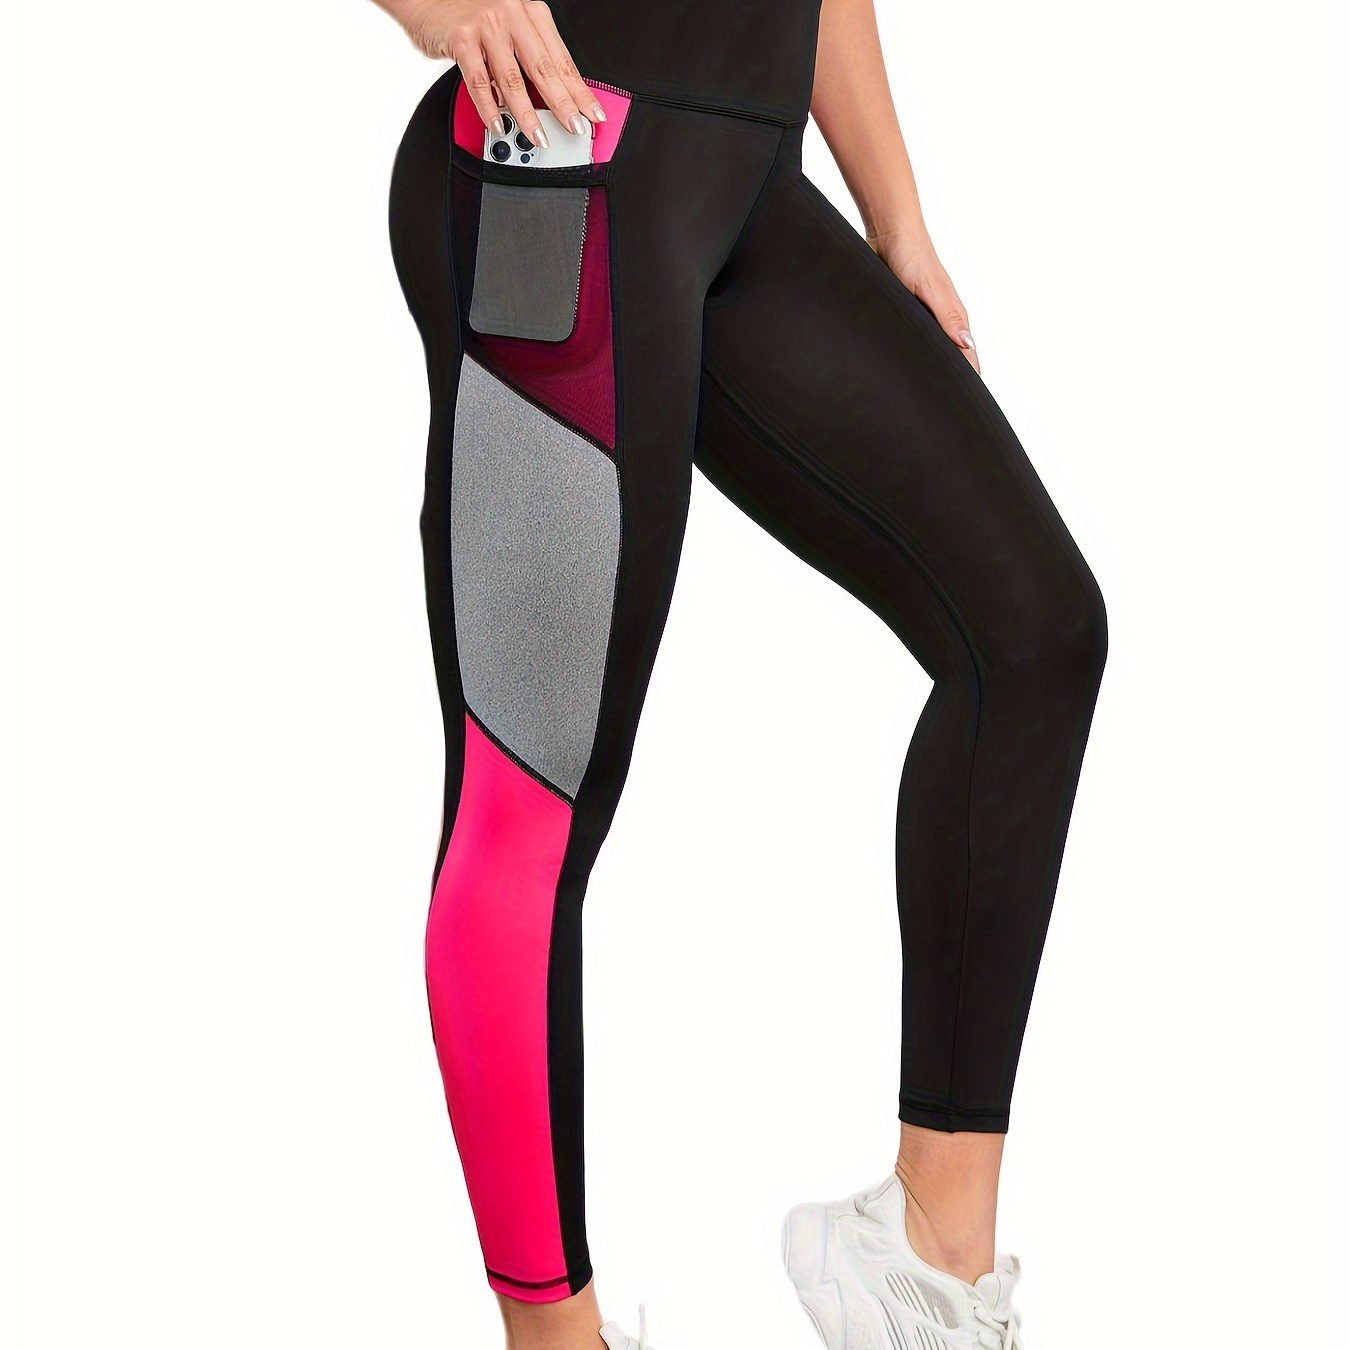 

Women's High-waist Color Block Yoga Pants, Slim Fit Butt Lifting Athletic Leggings With Mesh Pocket, Breathable Quick-dry Running Tights For Workout And Dance